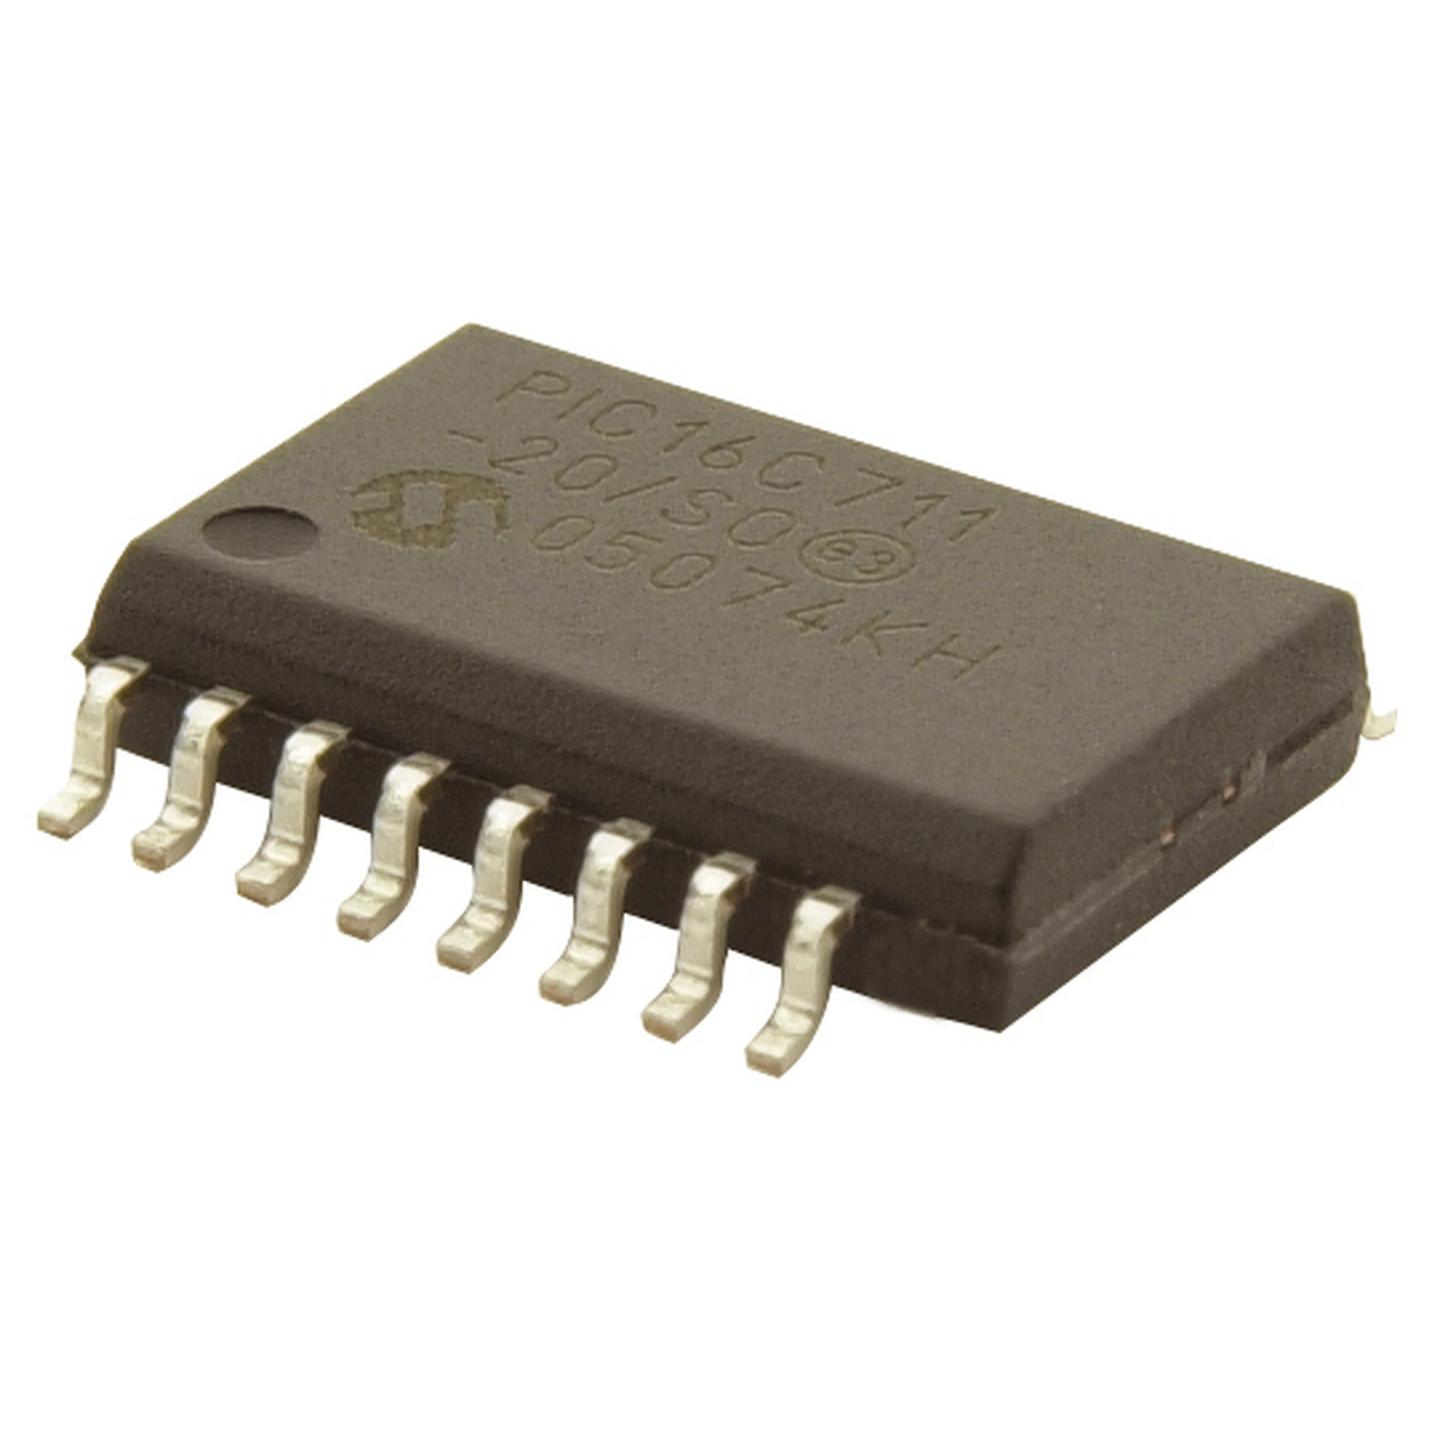 SMD IC LM358D S0IC8 - Pack 10